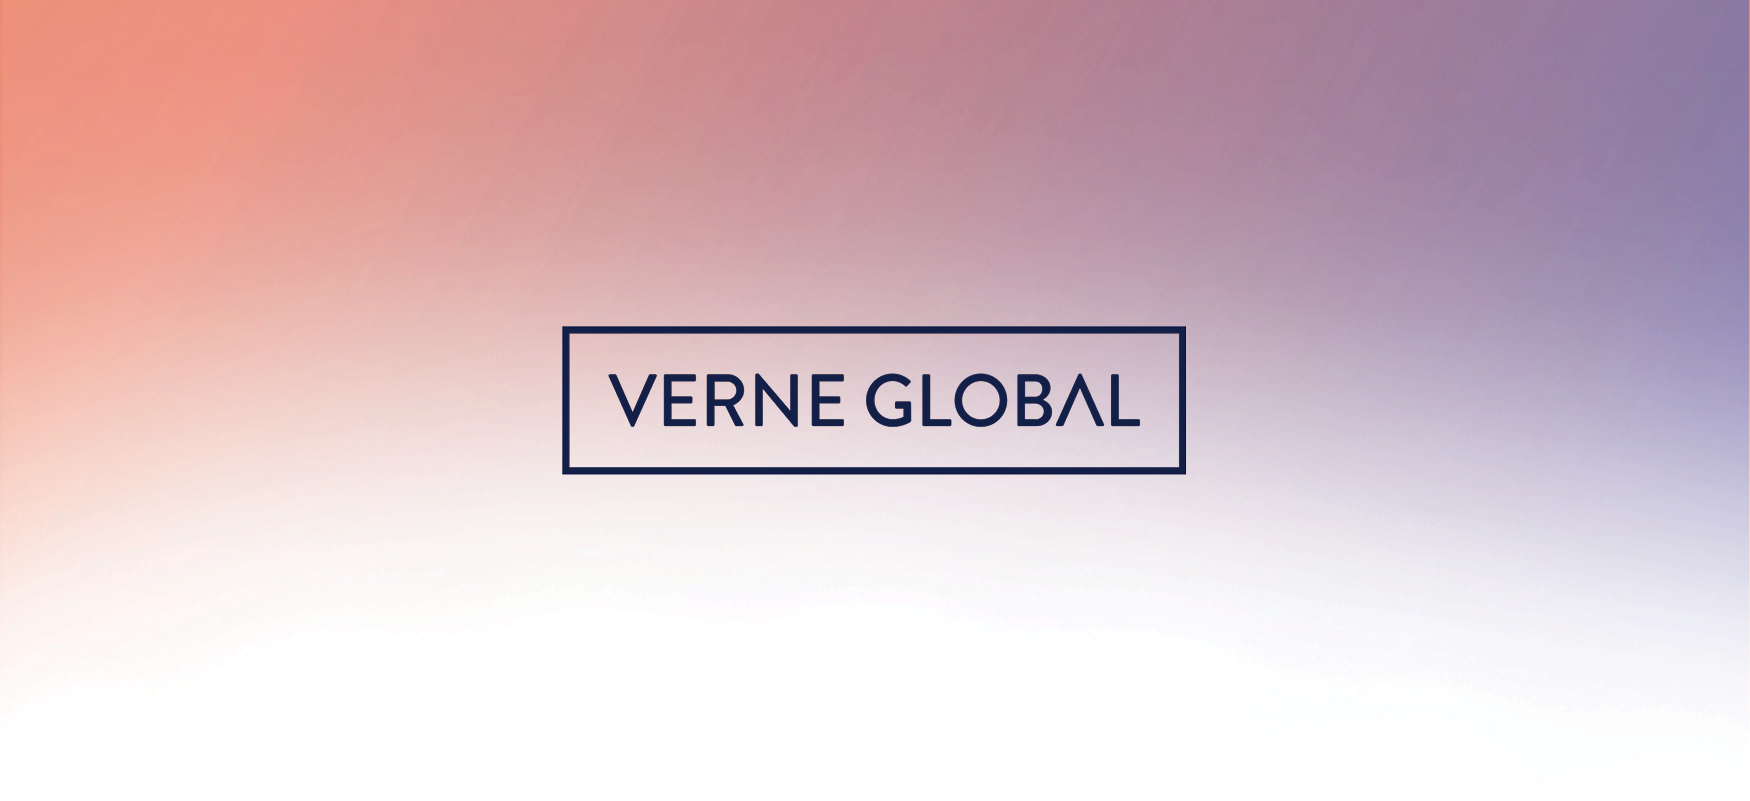 Epsilon Delivers Network Accessibility into Verne Global’s Sustainable Data Centre